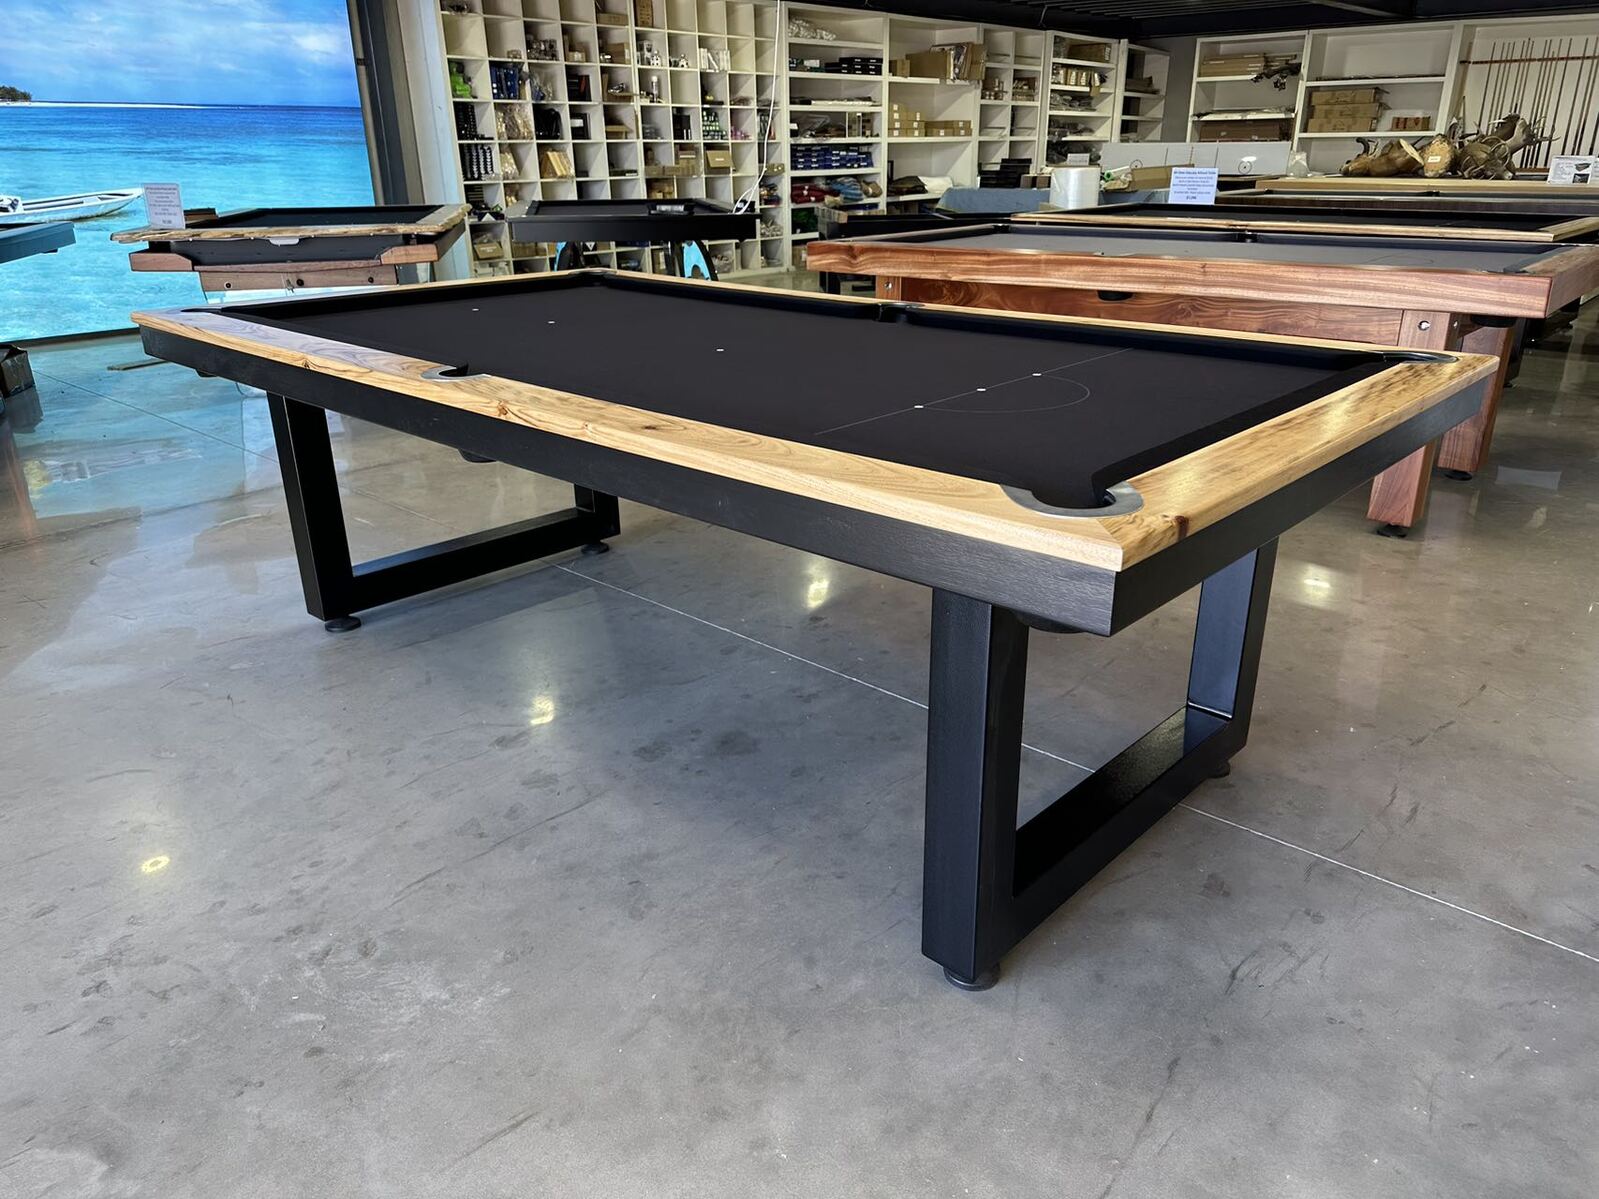 Pre-made 8 Foot Slate Odyssey Pool Billiards Table, camphor timber